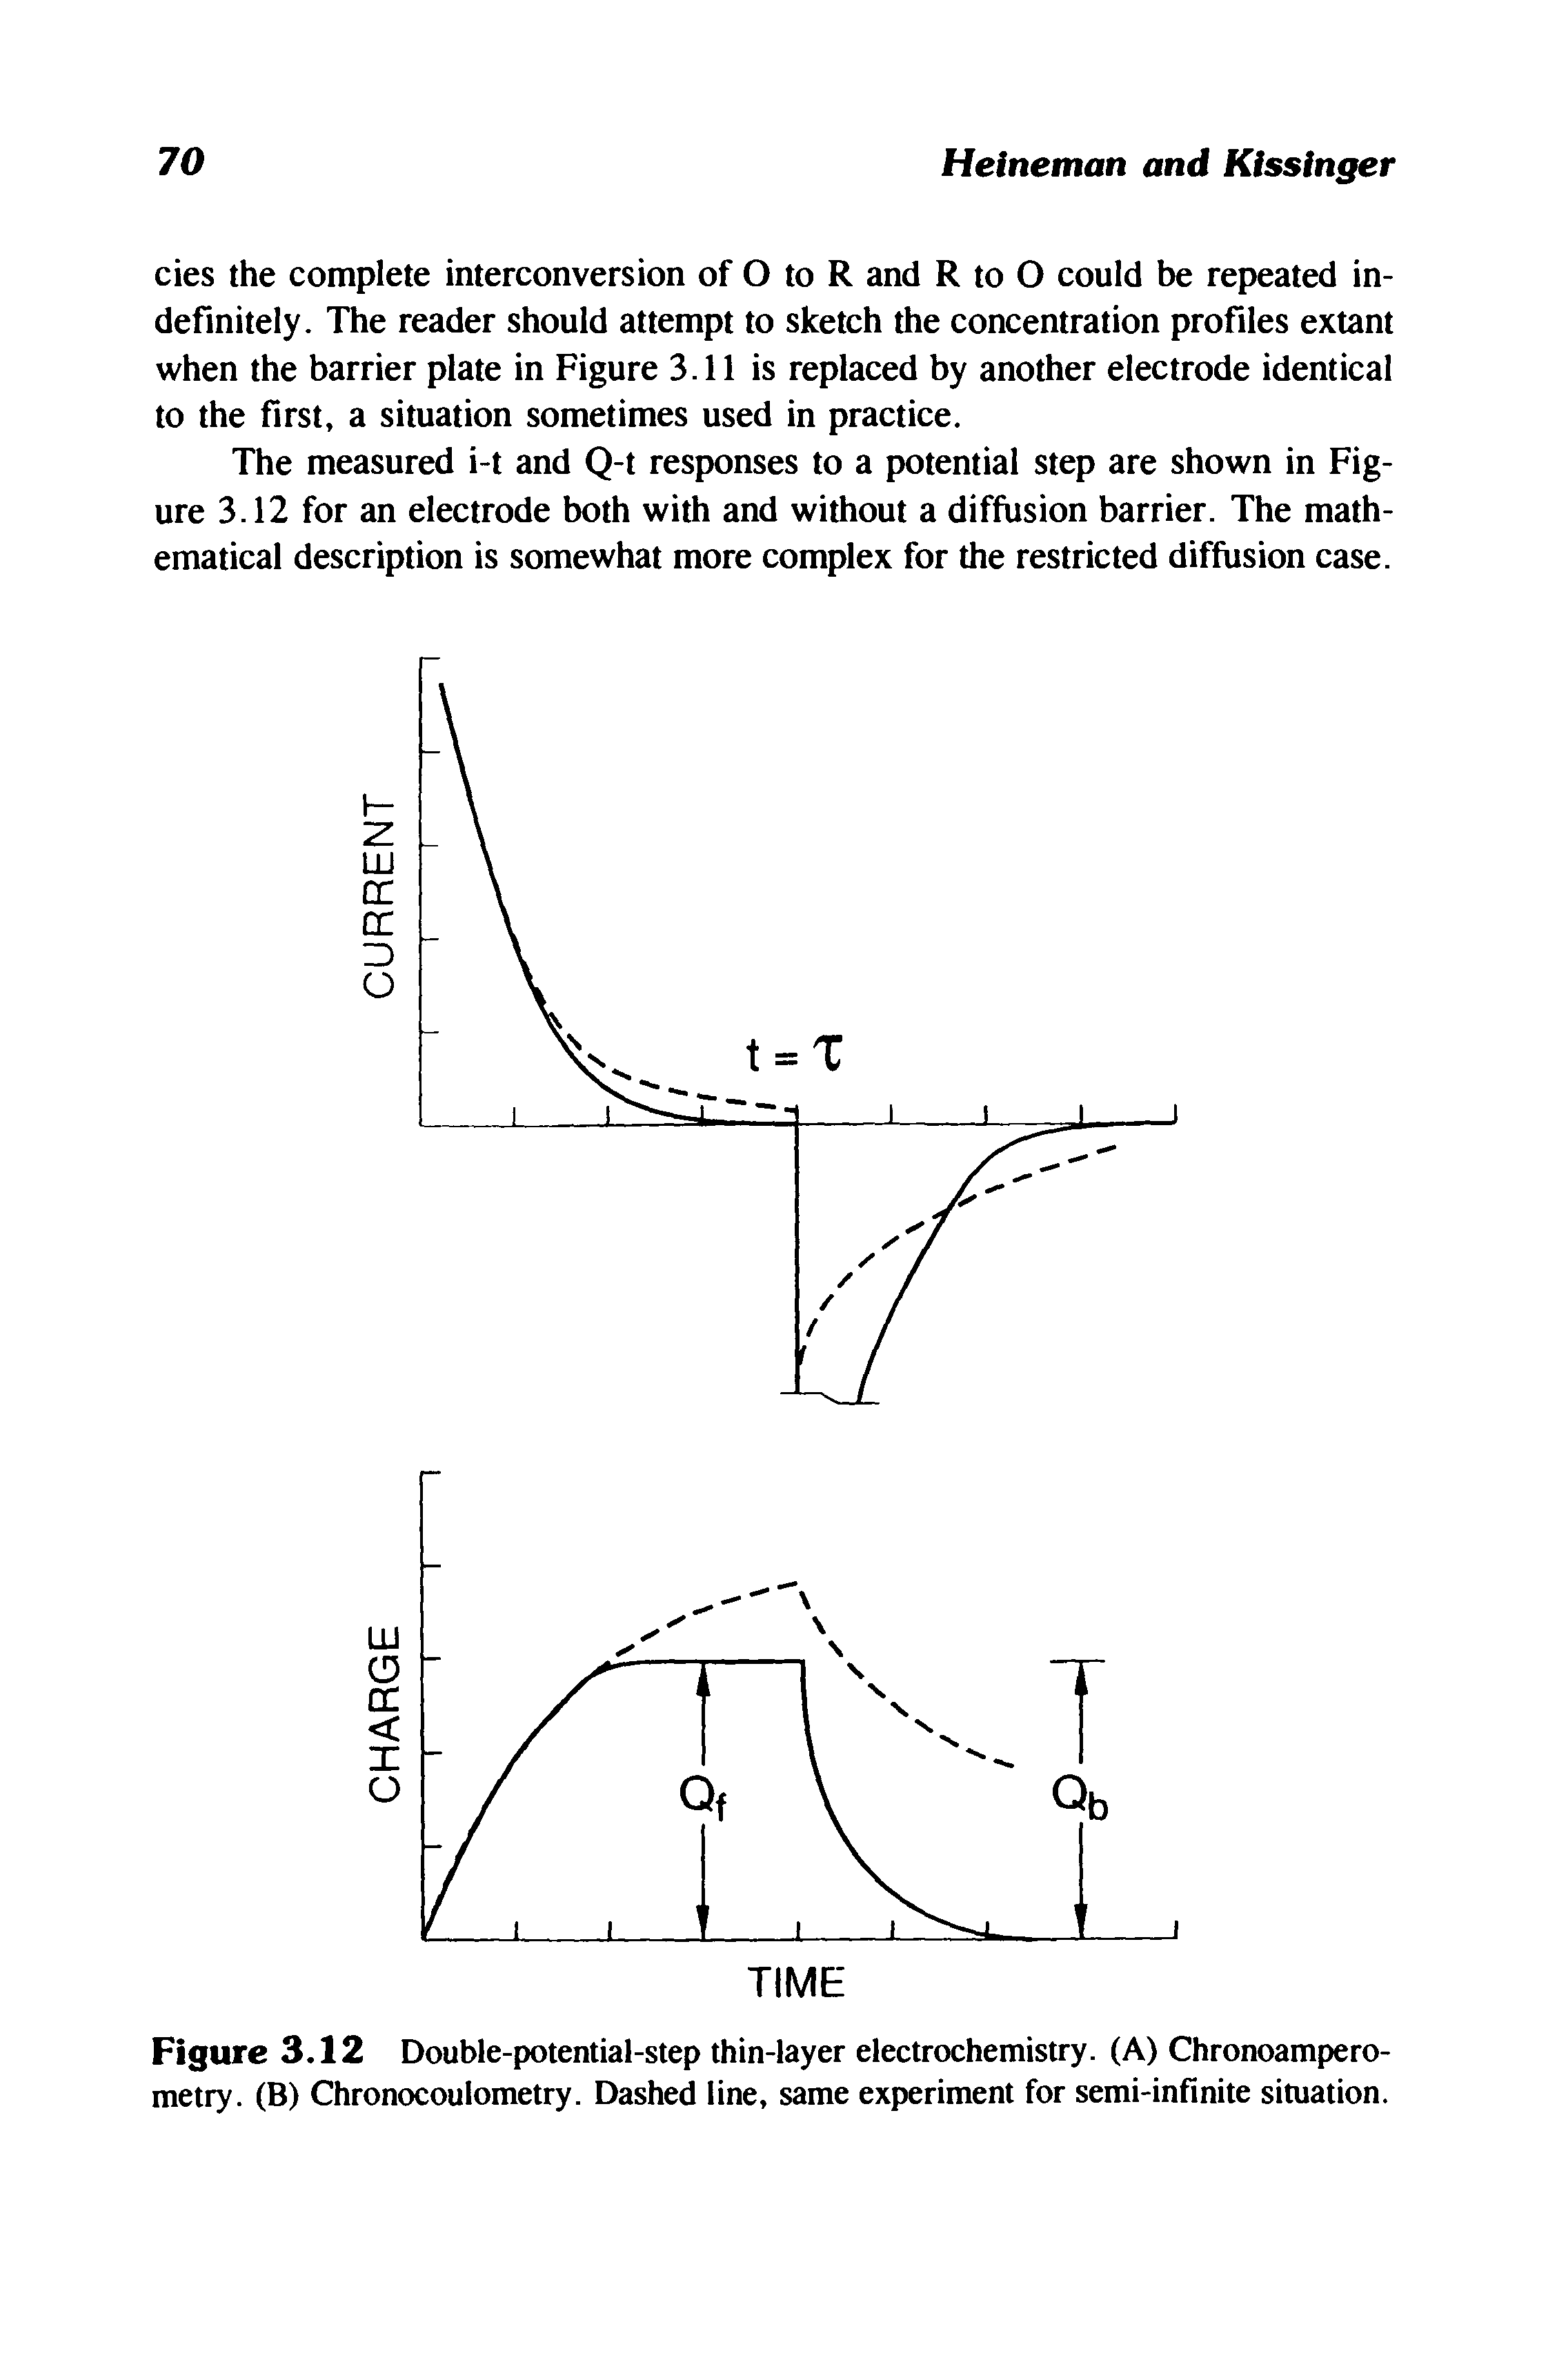 Figure 3.12 Double-potential-step thin-layer electrochemistry. (A) Chronoampero-metry. (B) Chronocoulometry. Dashed line, same experiment for semi-infinite situation.